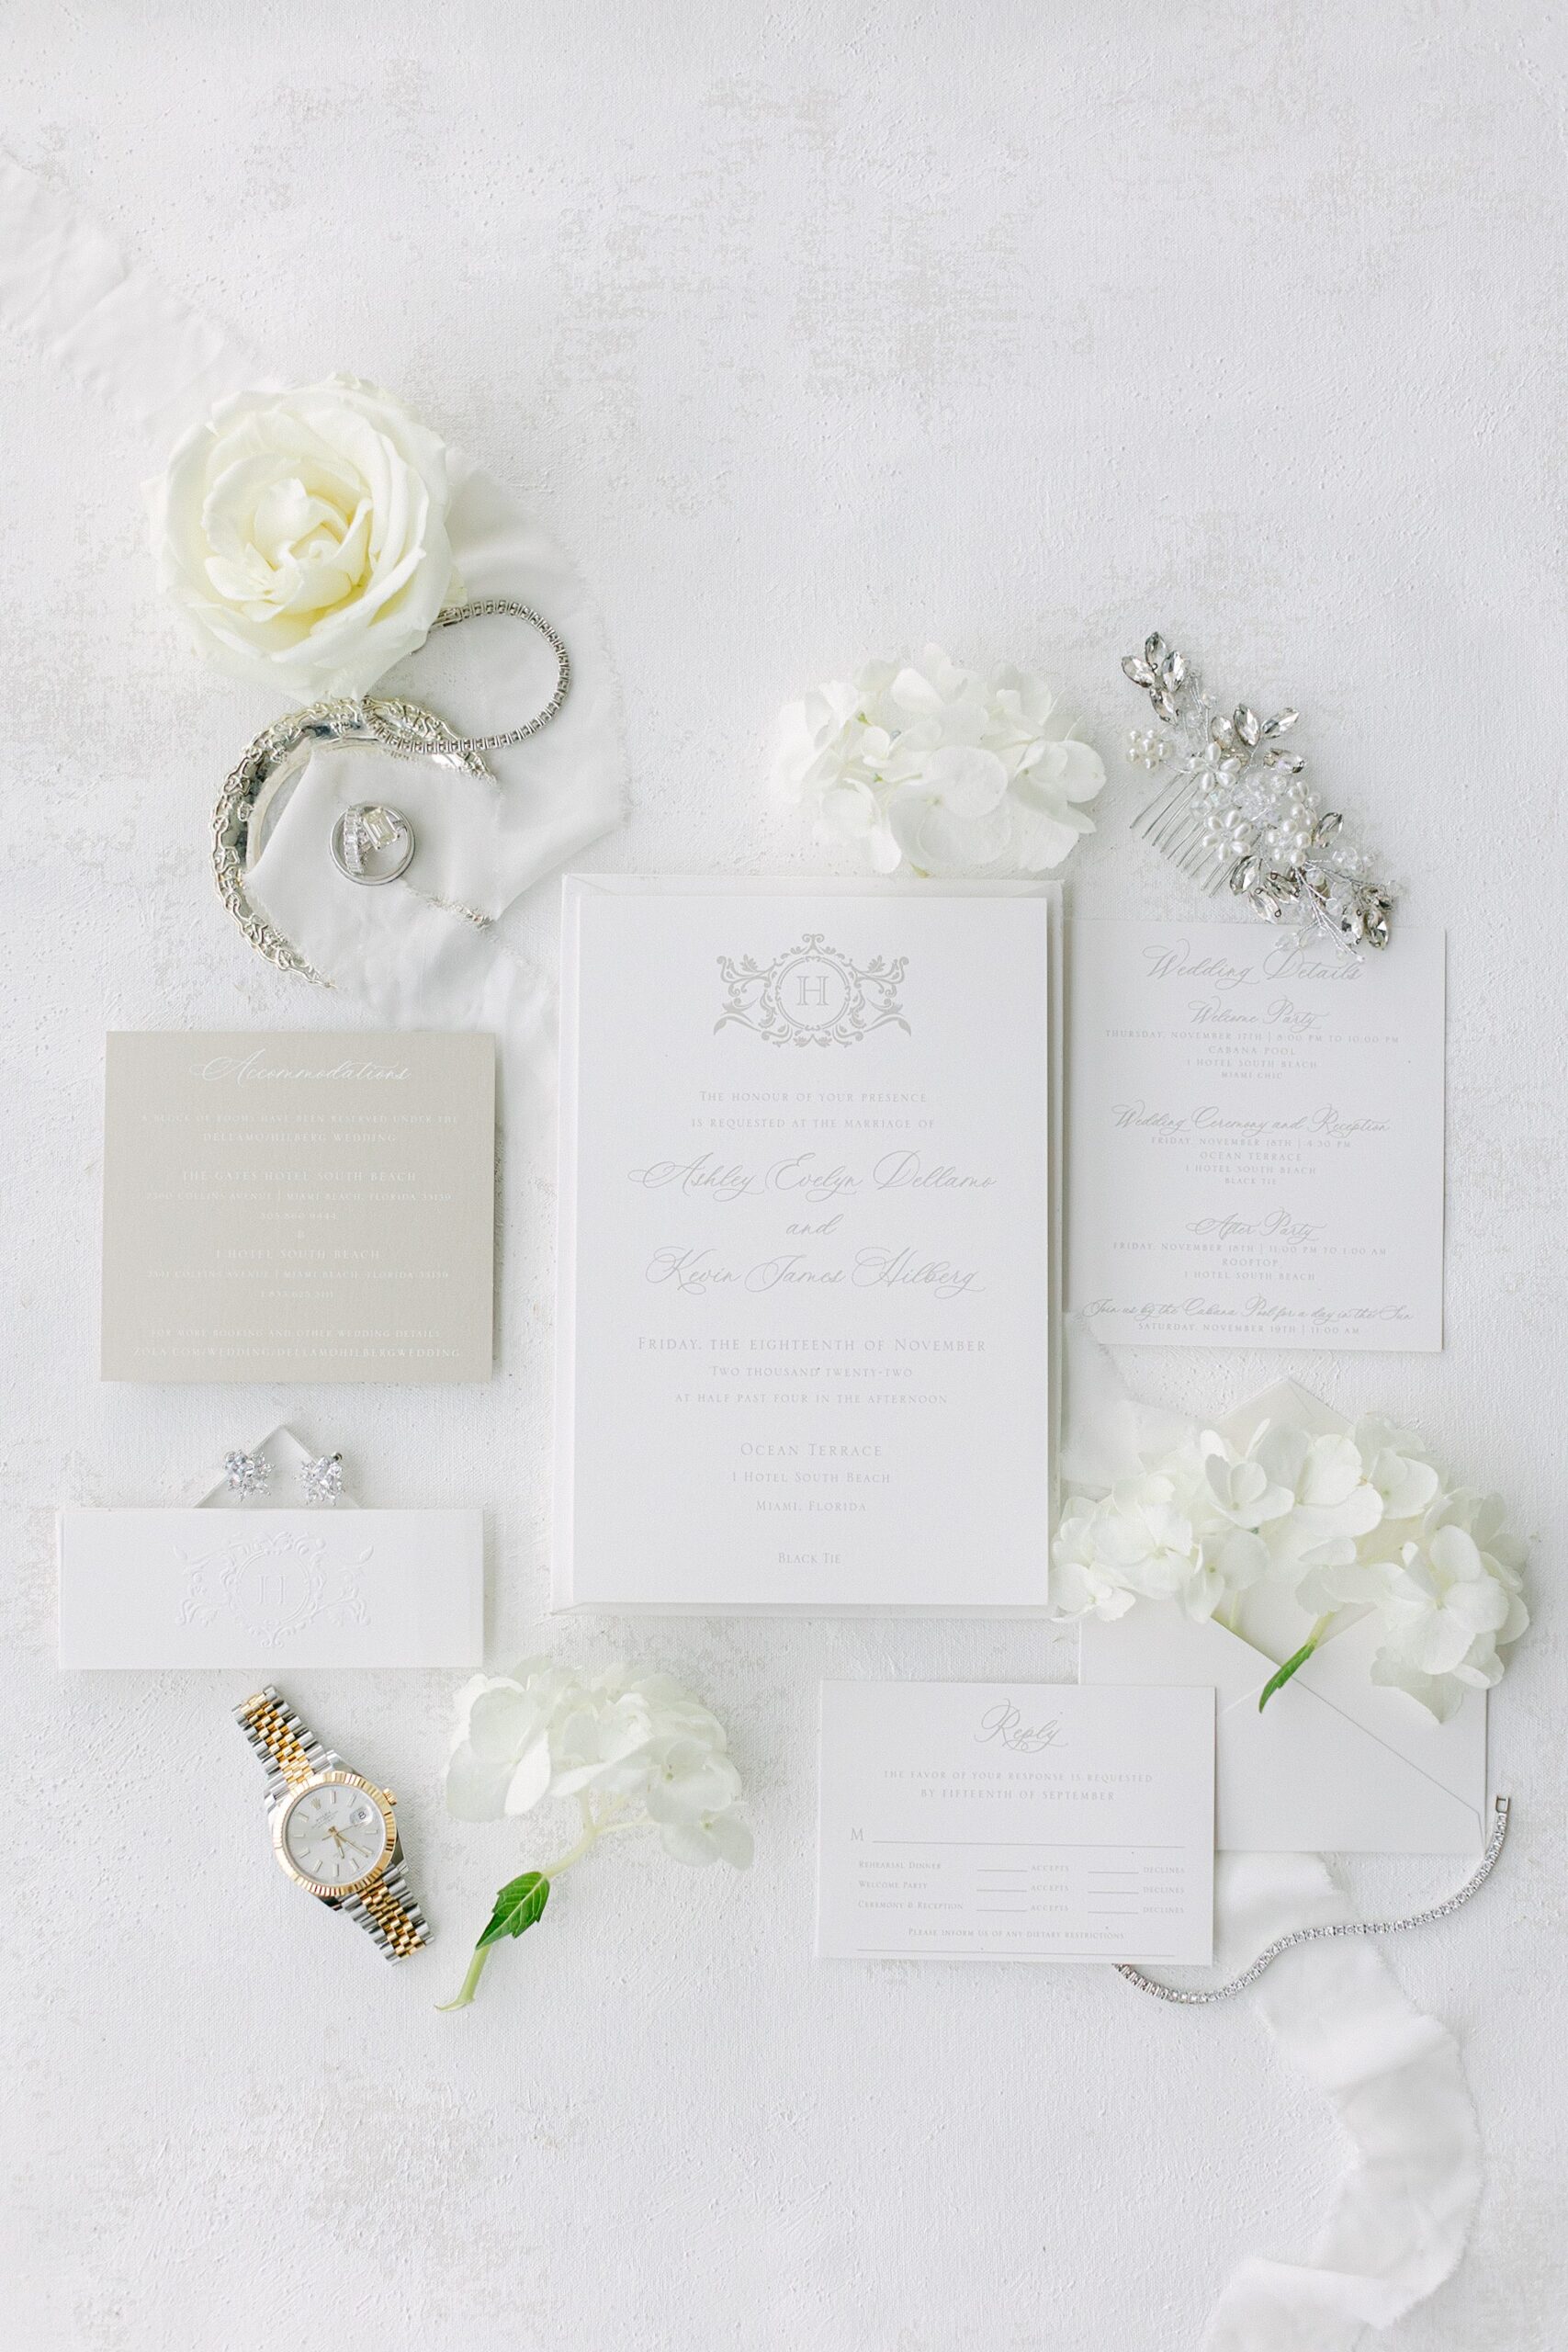 White Lay flat of bridal details including the wedding invitation, hair piece, wedding bands, diamond earrings and rolex watch